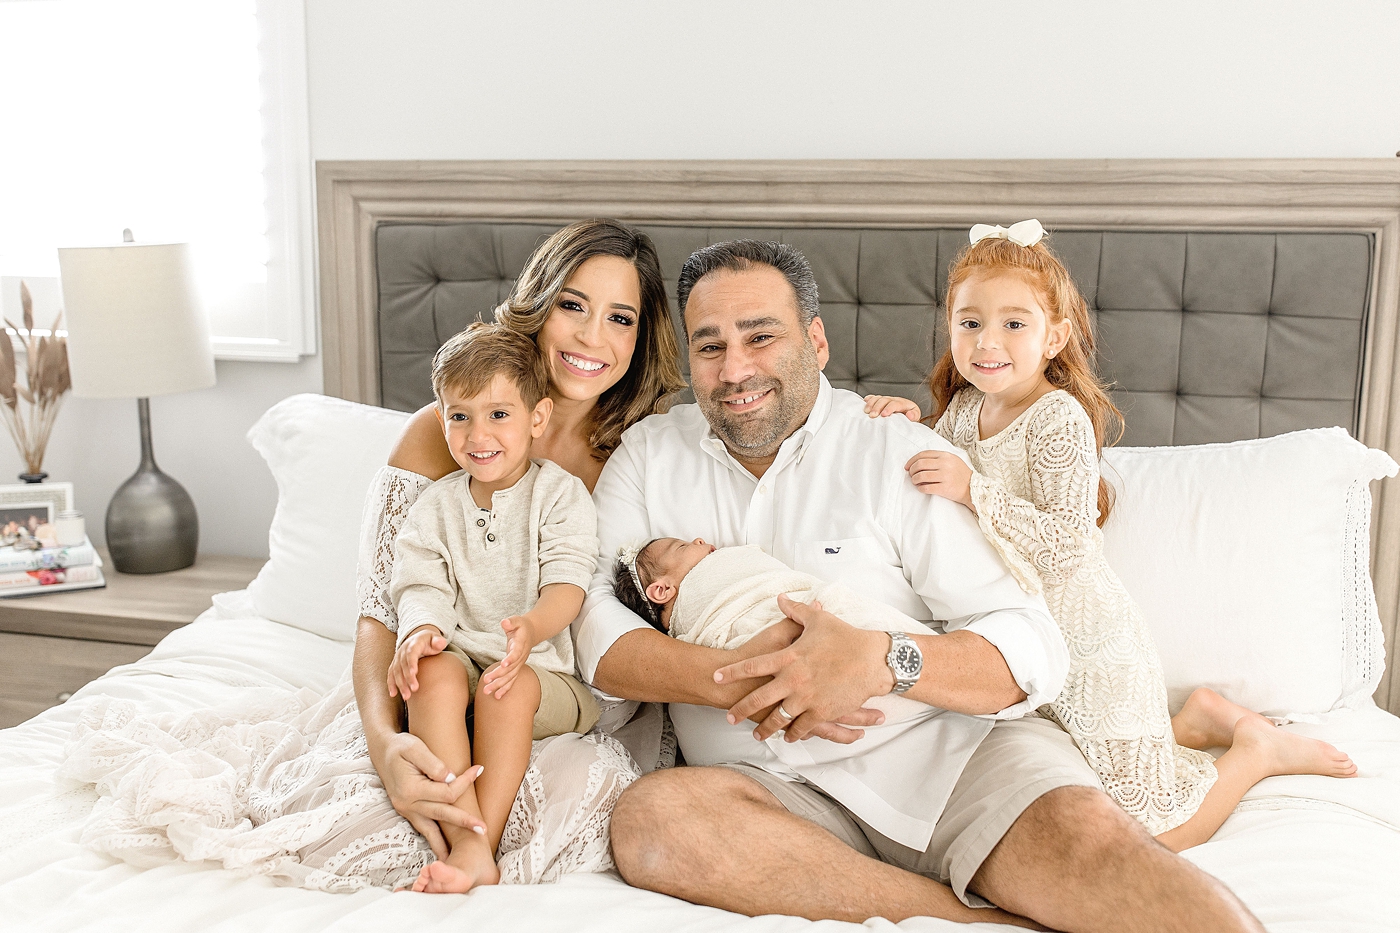 Family of five smiles for portrait during in home Newborn Photography Miami session. Photo by Ivanna Vidal Photography.